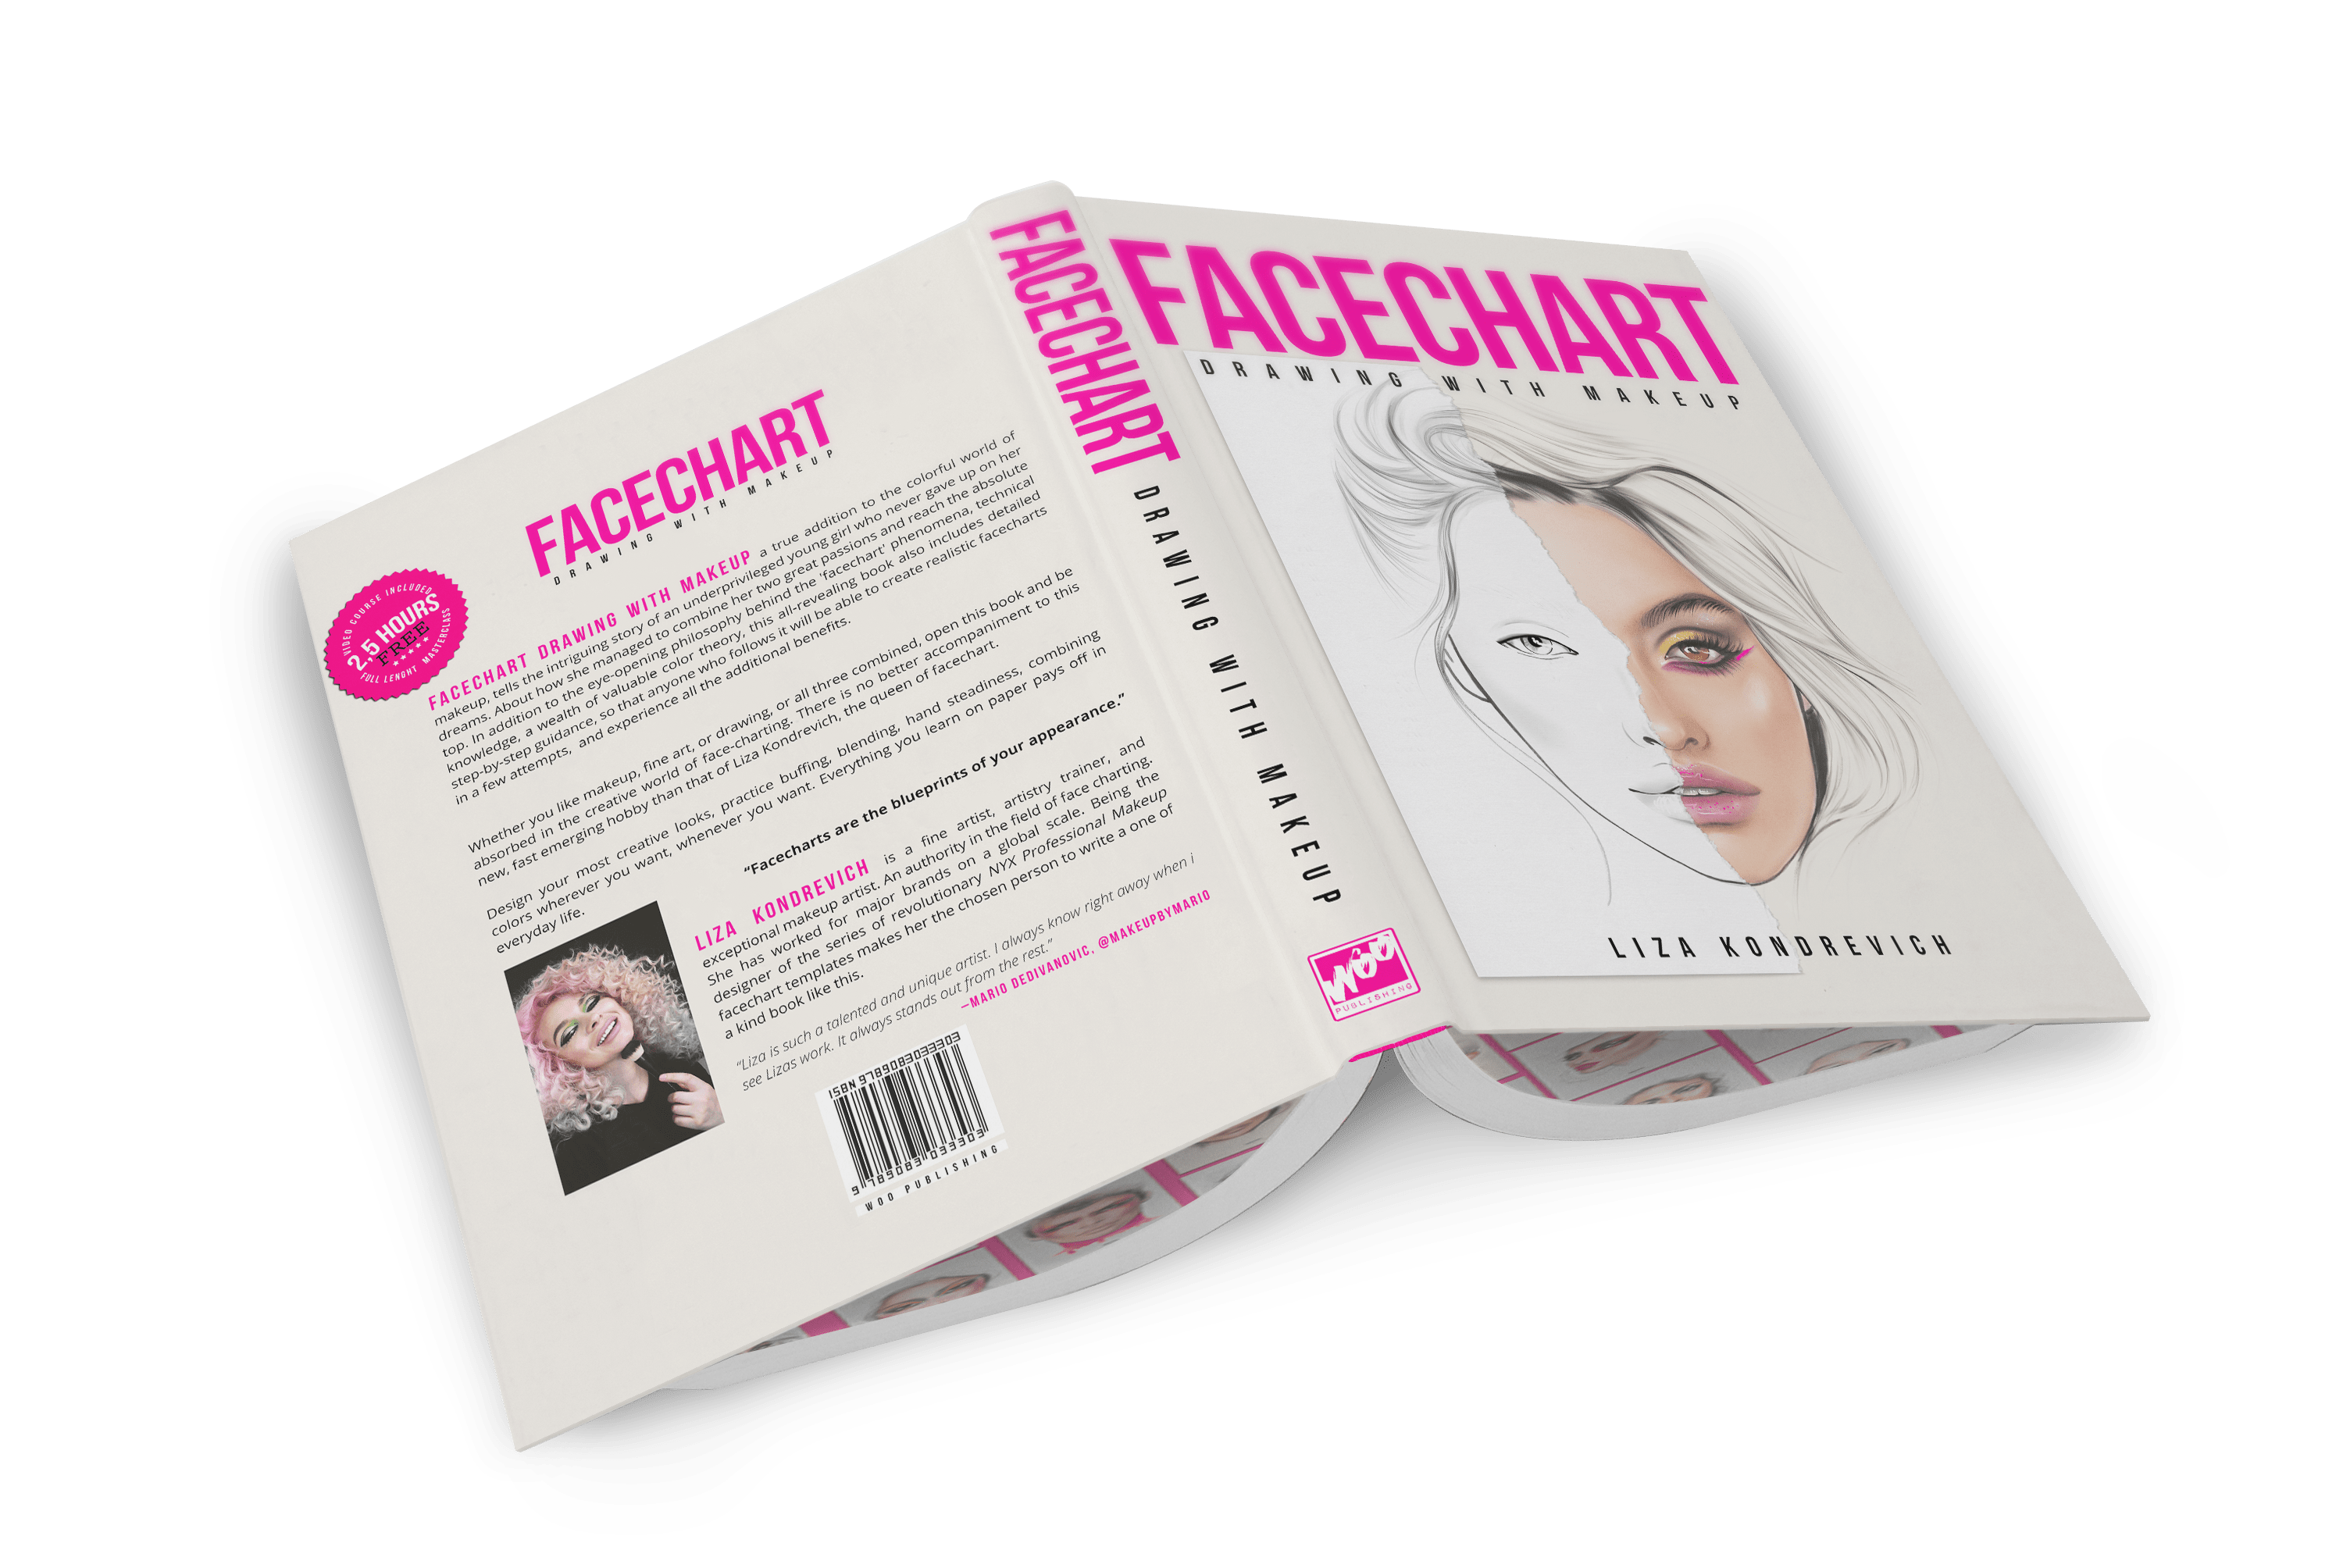 The Book about face chart makeup spread open, The facechart book by liza kondrevich